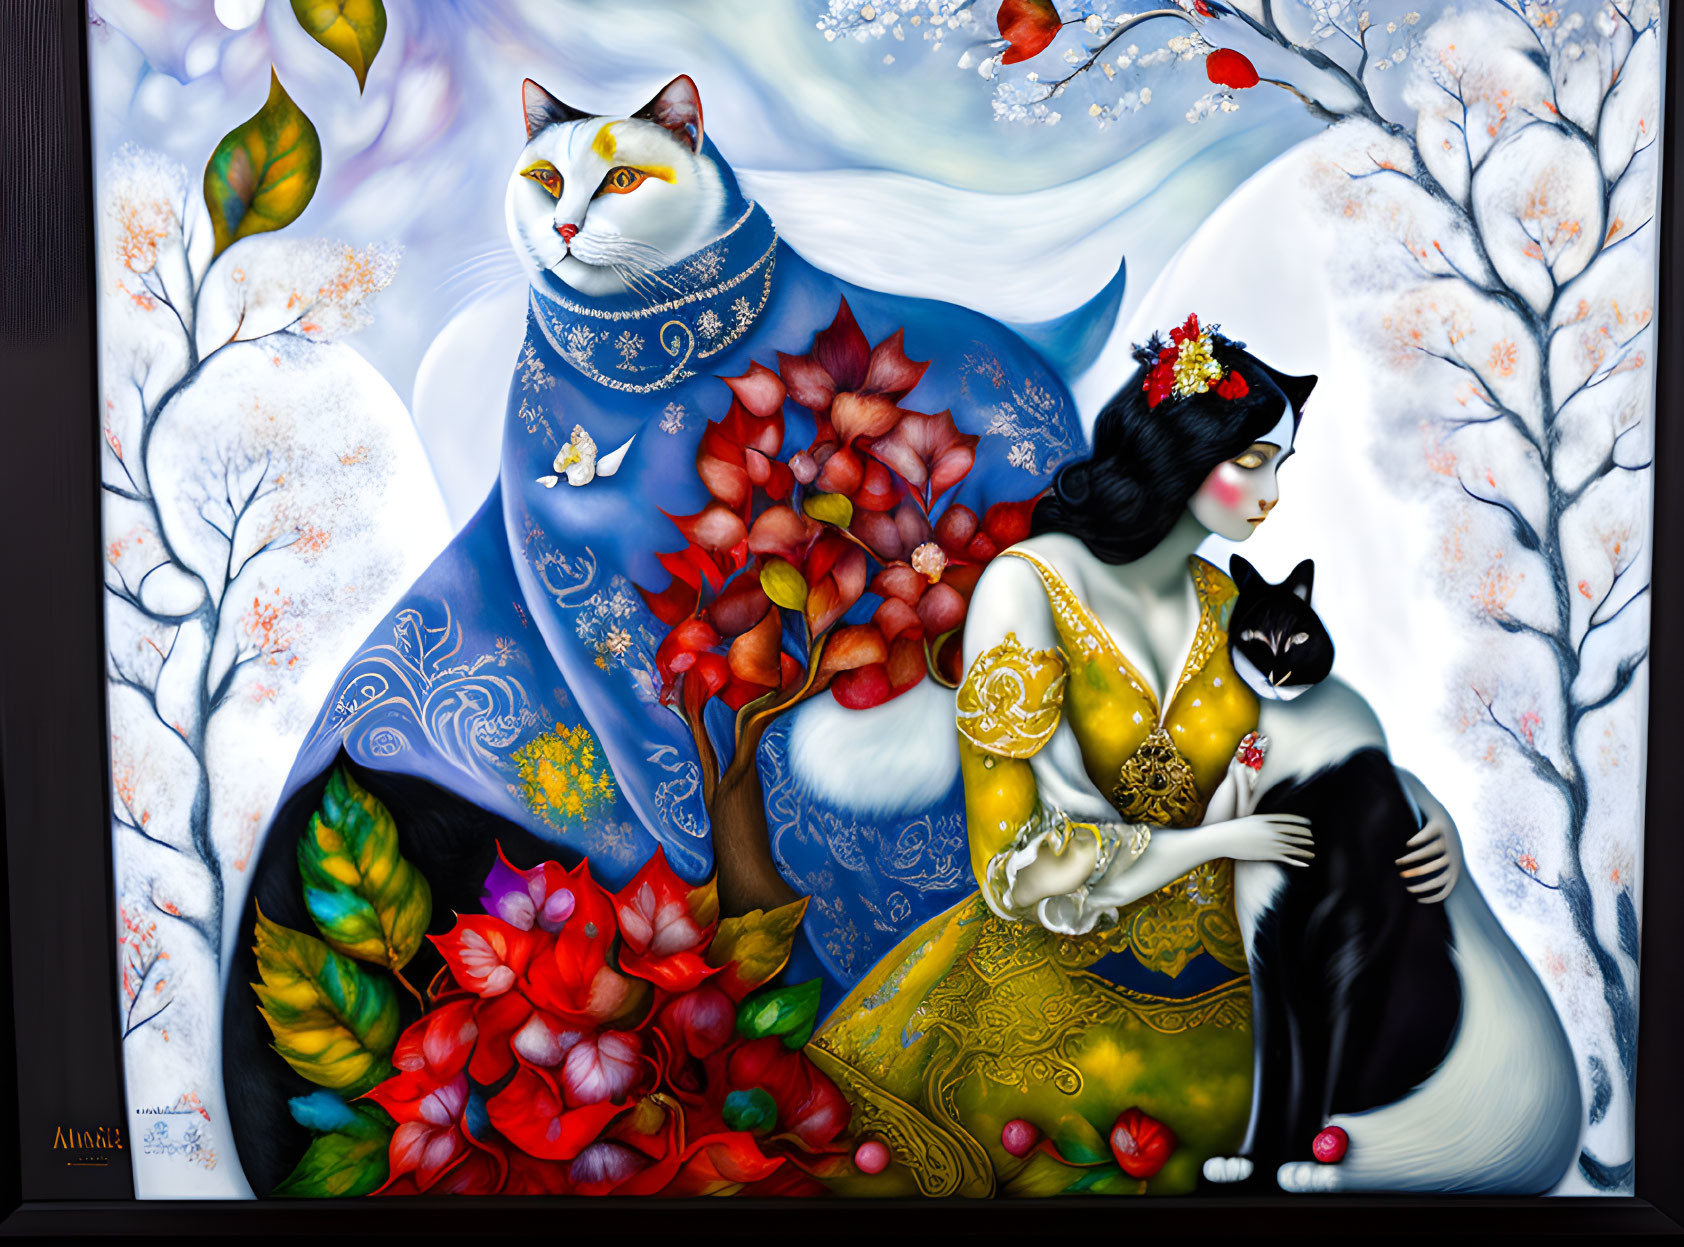 Colorful artwork: Woman in yellow dress with flower crown holding black cat, giant cat in blue cloak